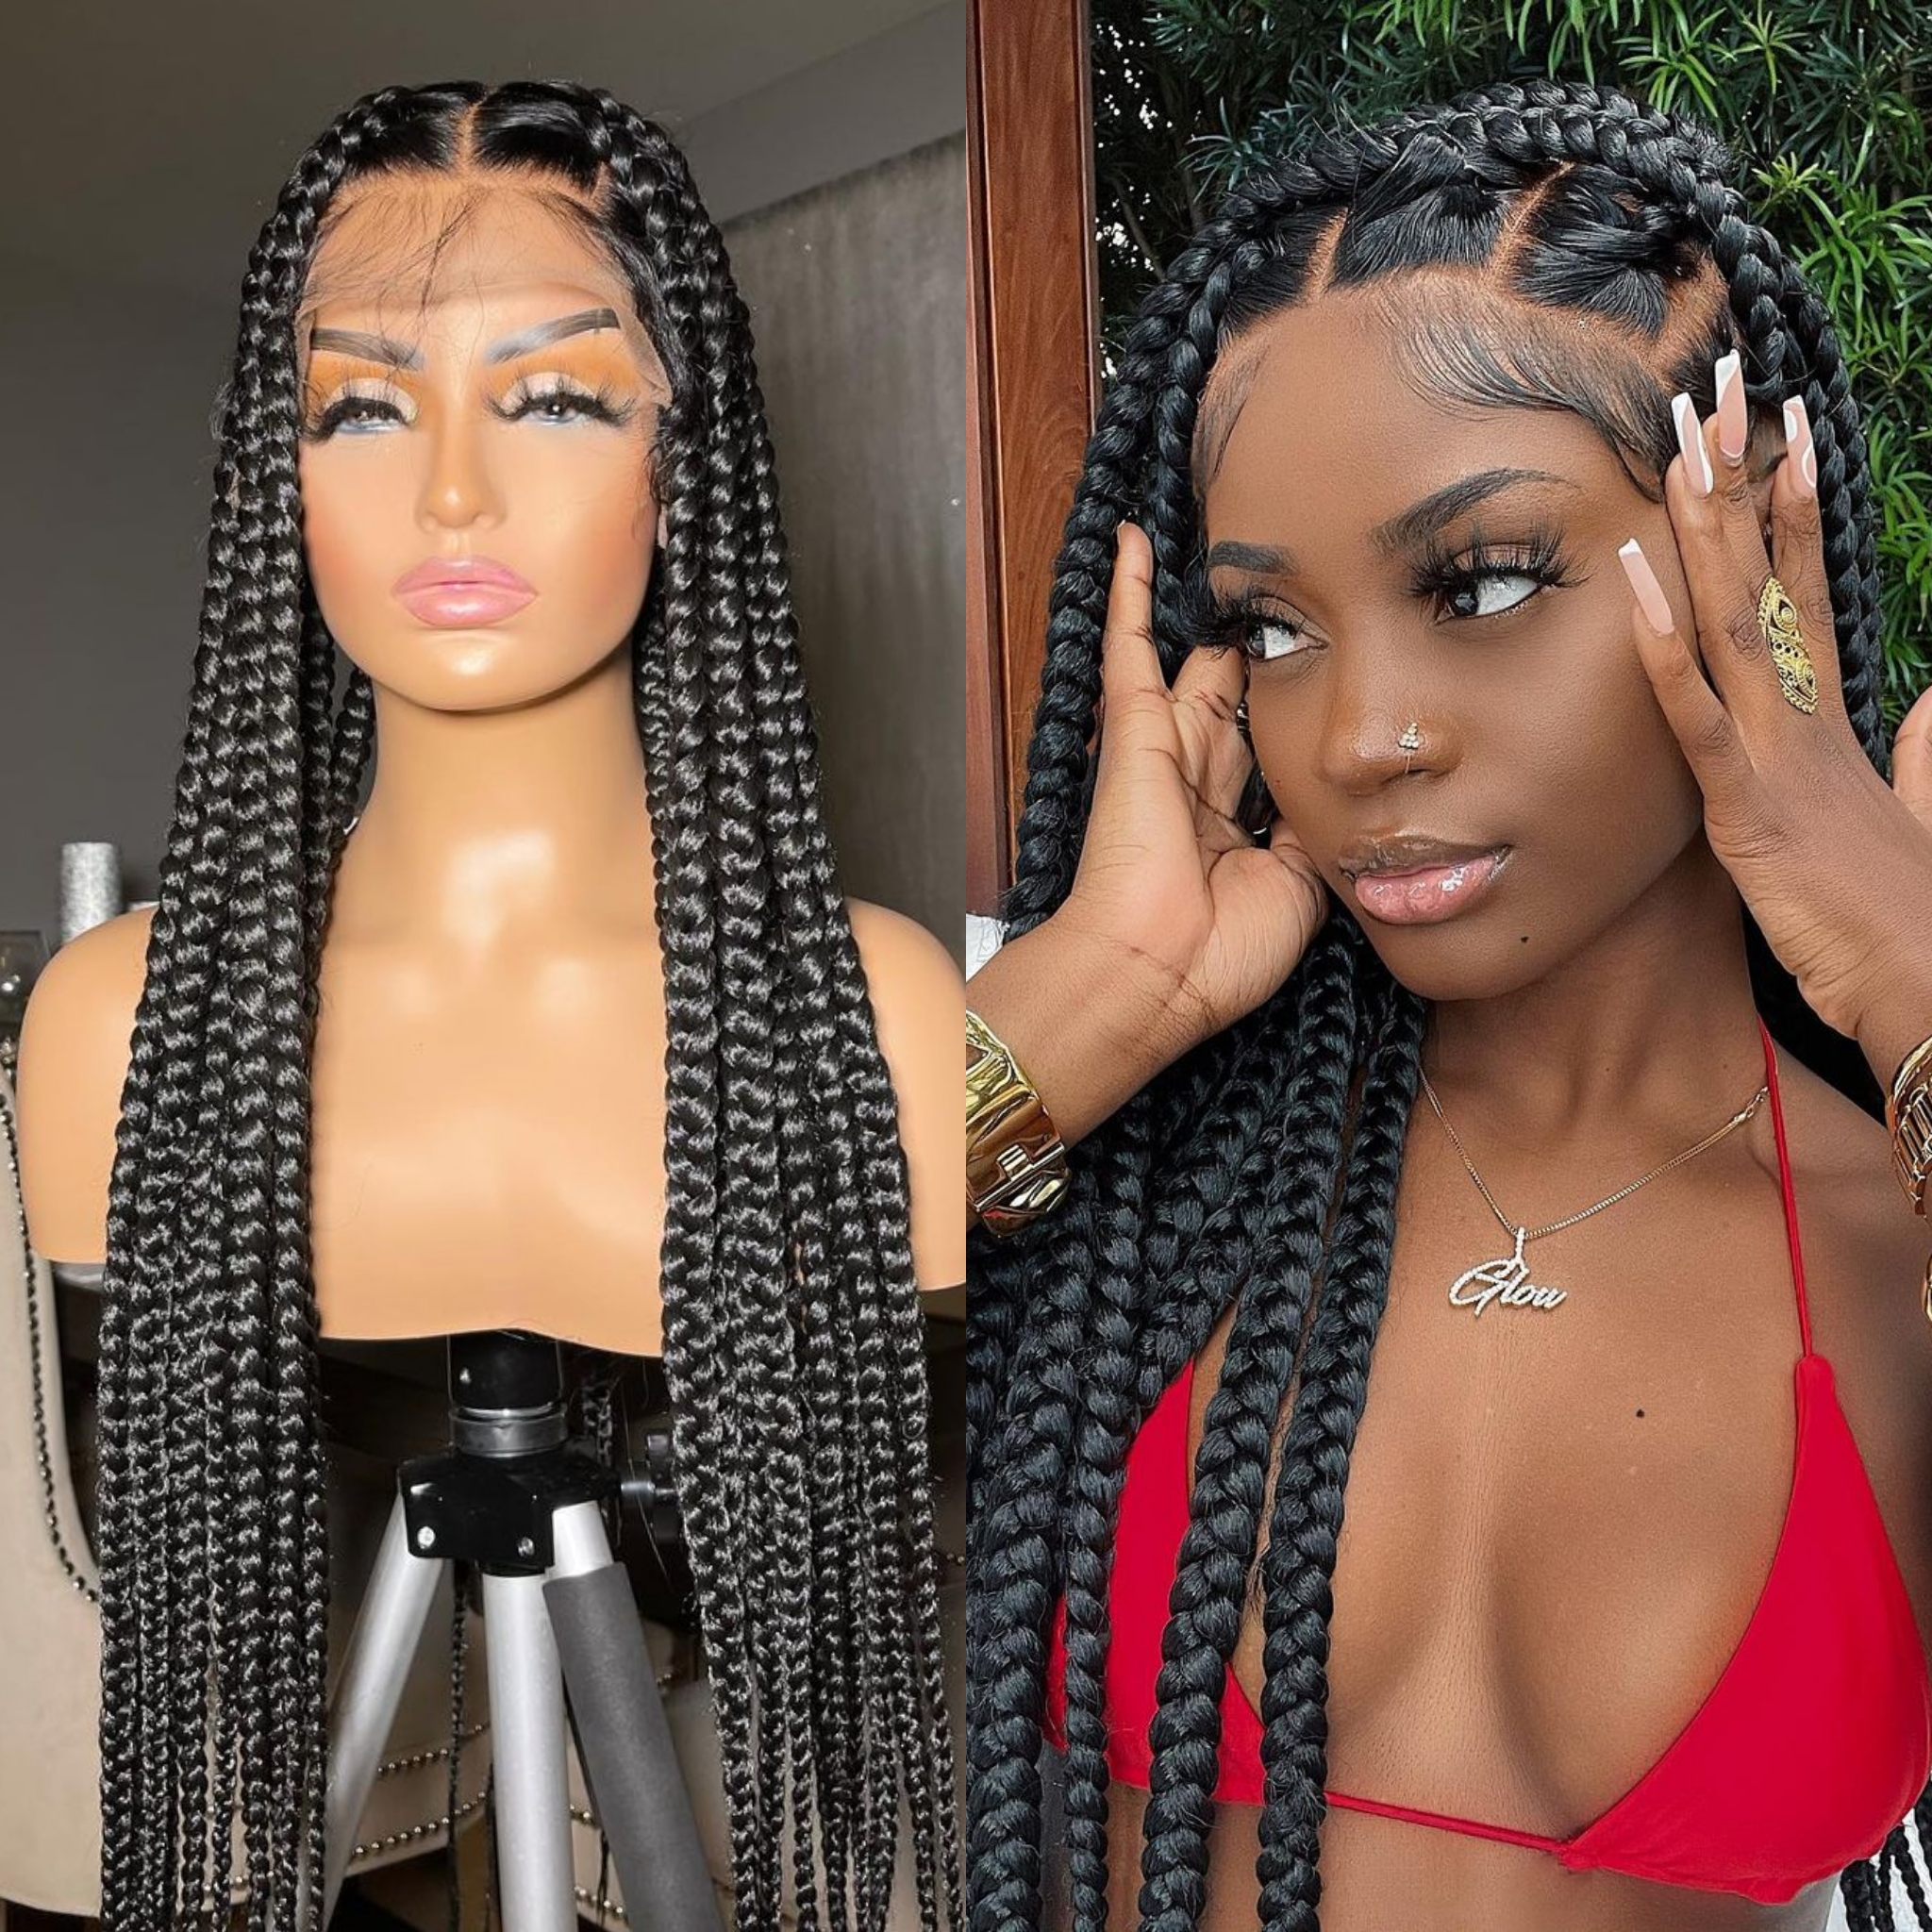 Knotless Full Lace Braided Wig  Full Lace knotless Braided Wigs